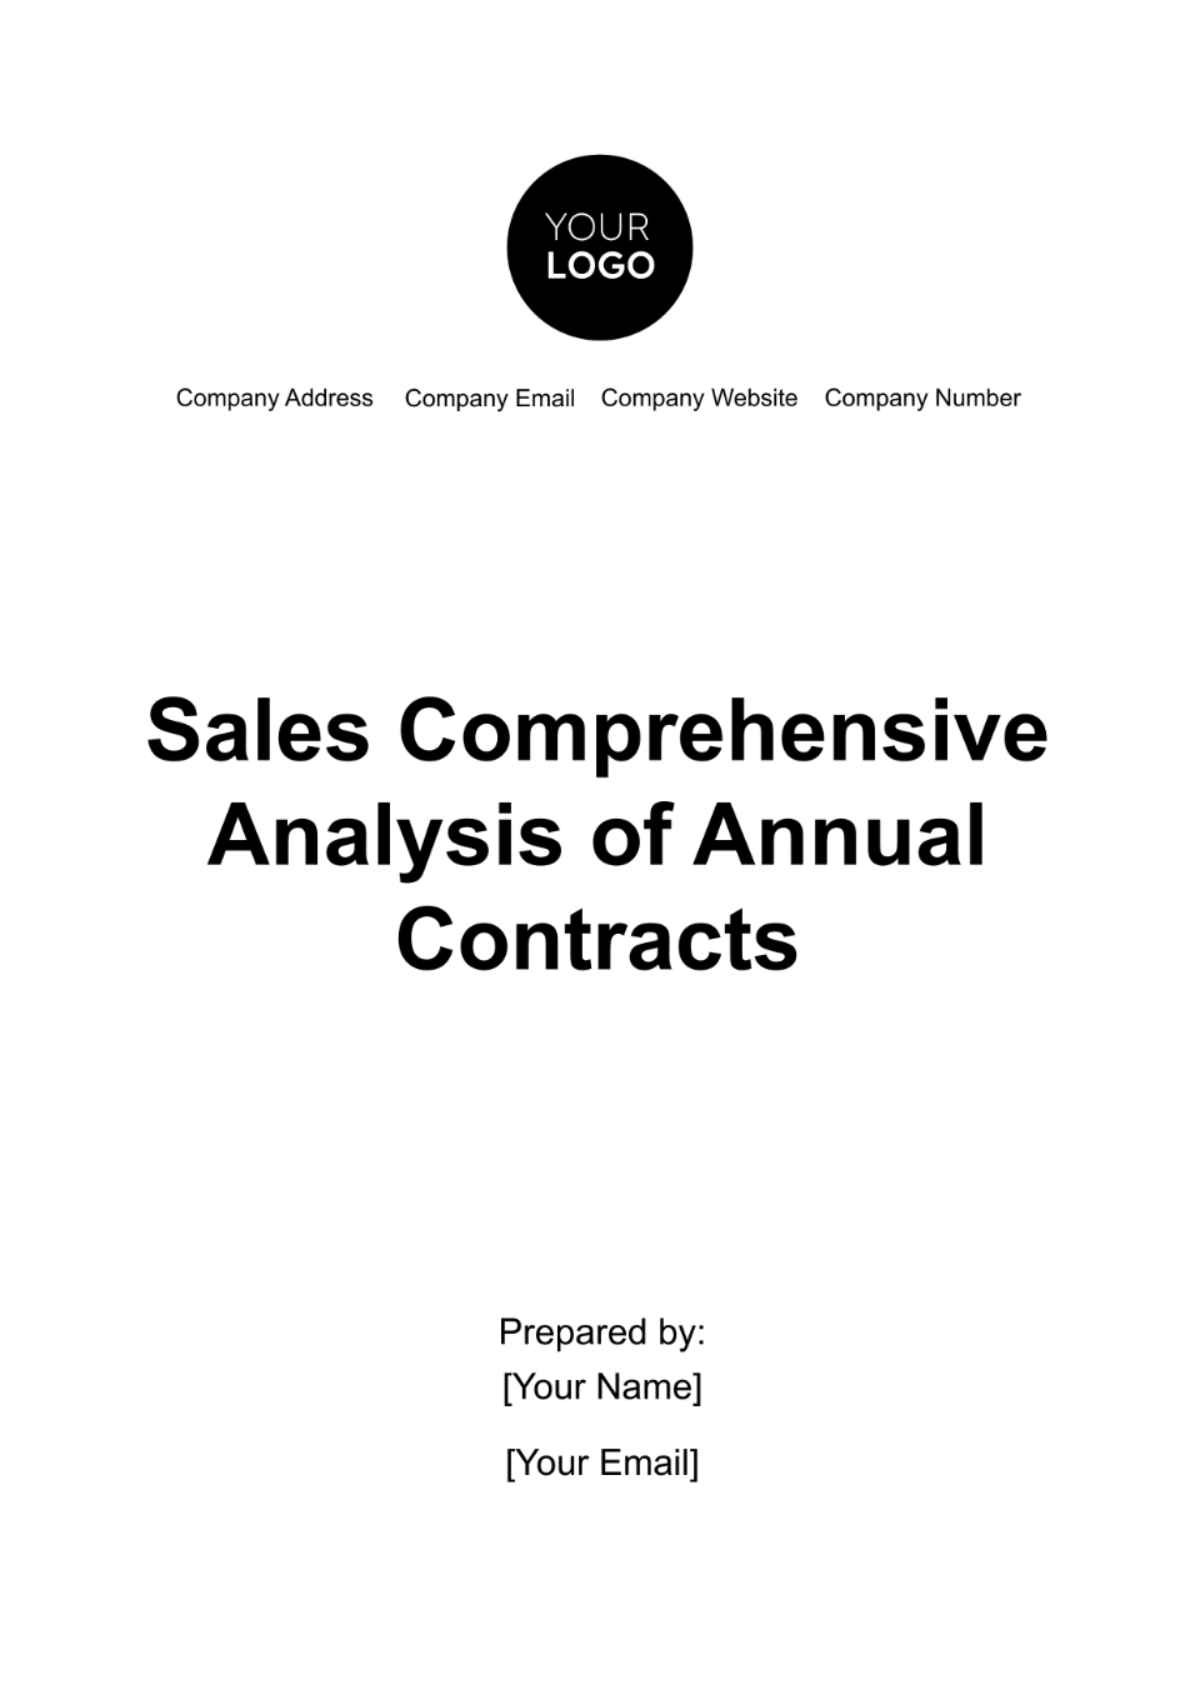 Sales Comprehensive Analysis of Annual Contracts Template